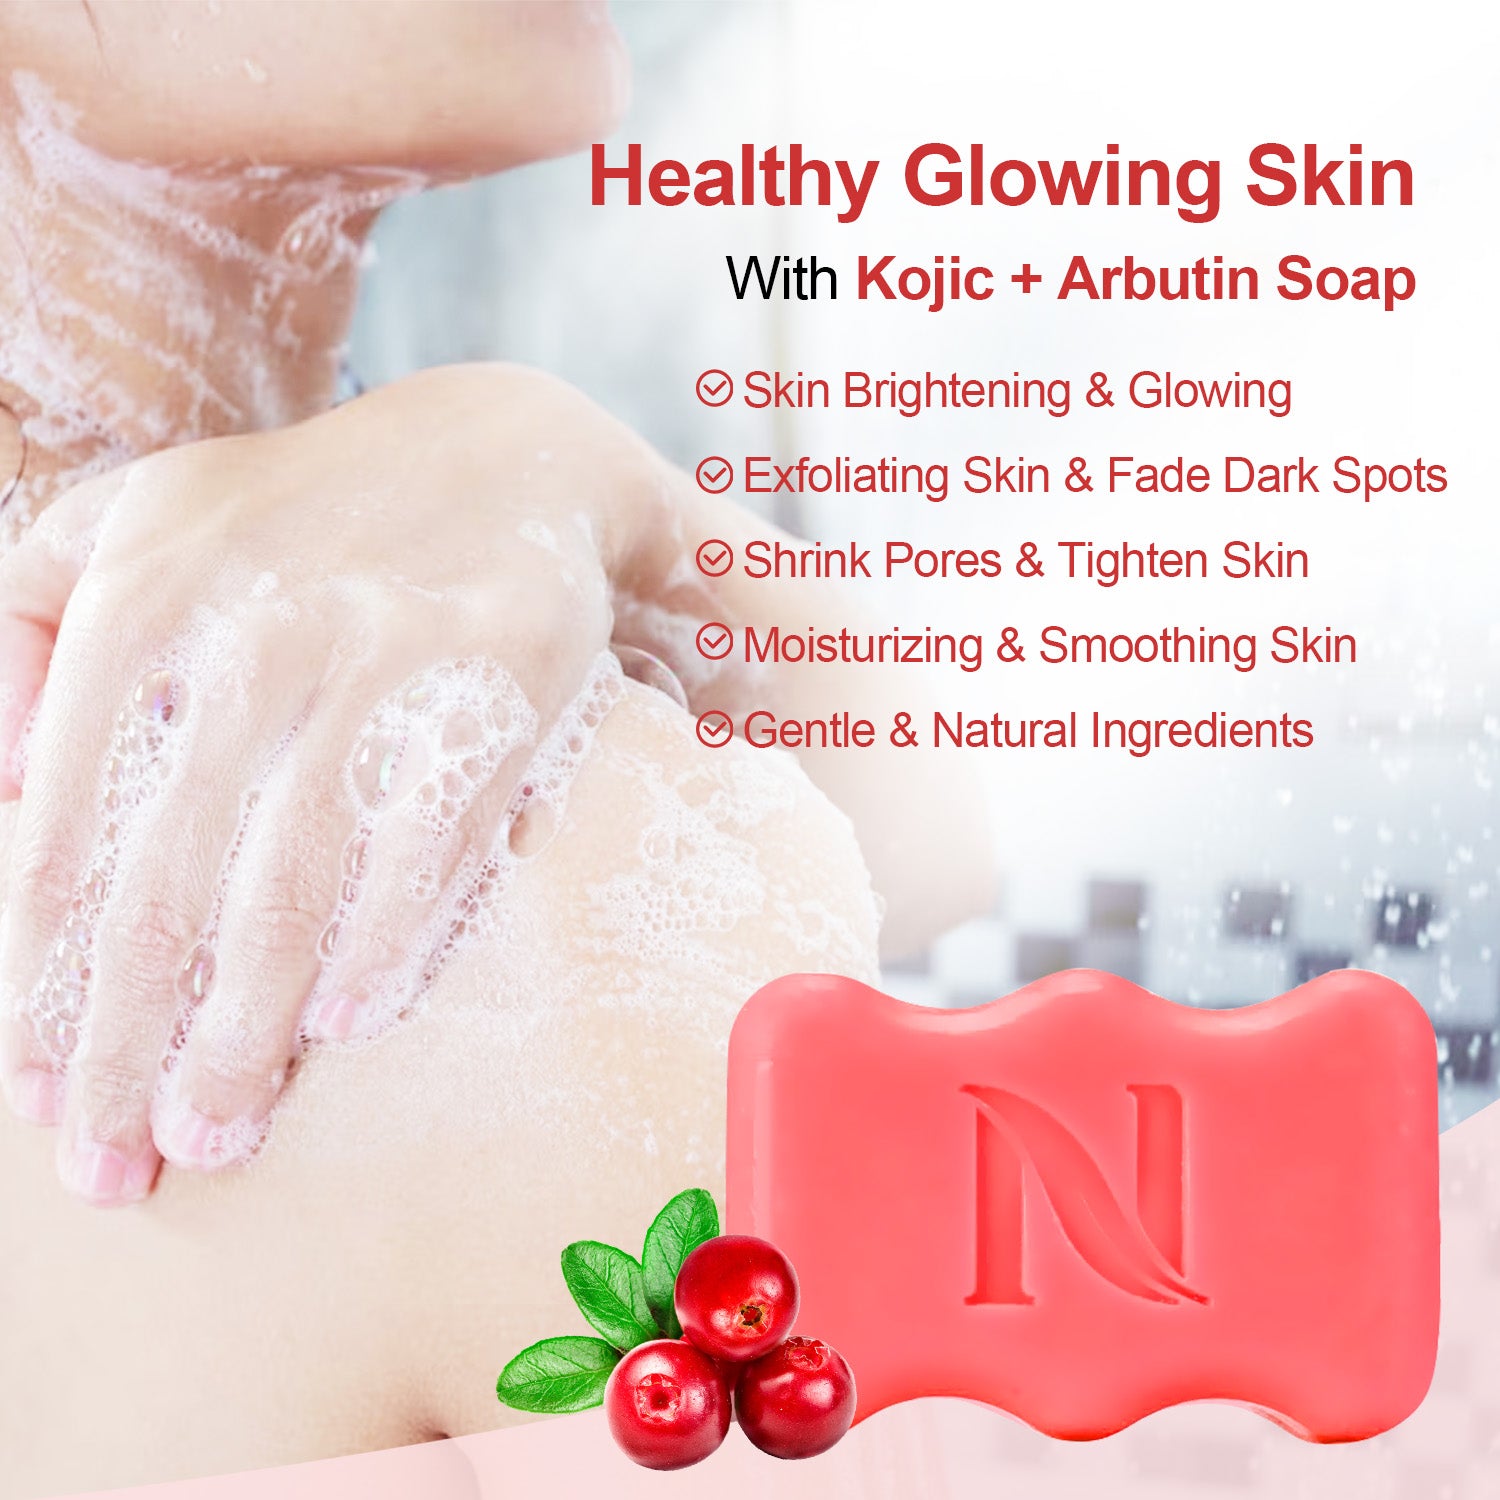 the function for kojic acid soap is brightening and fade dark spot